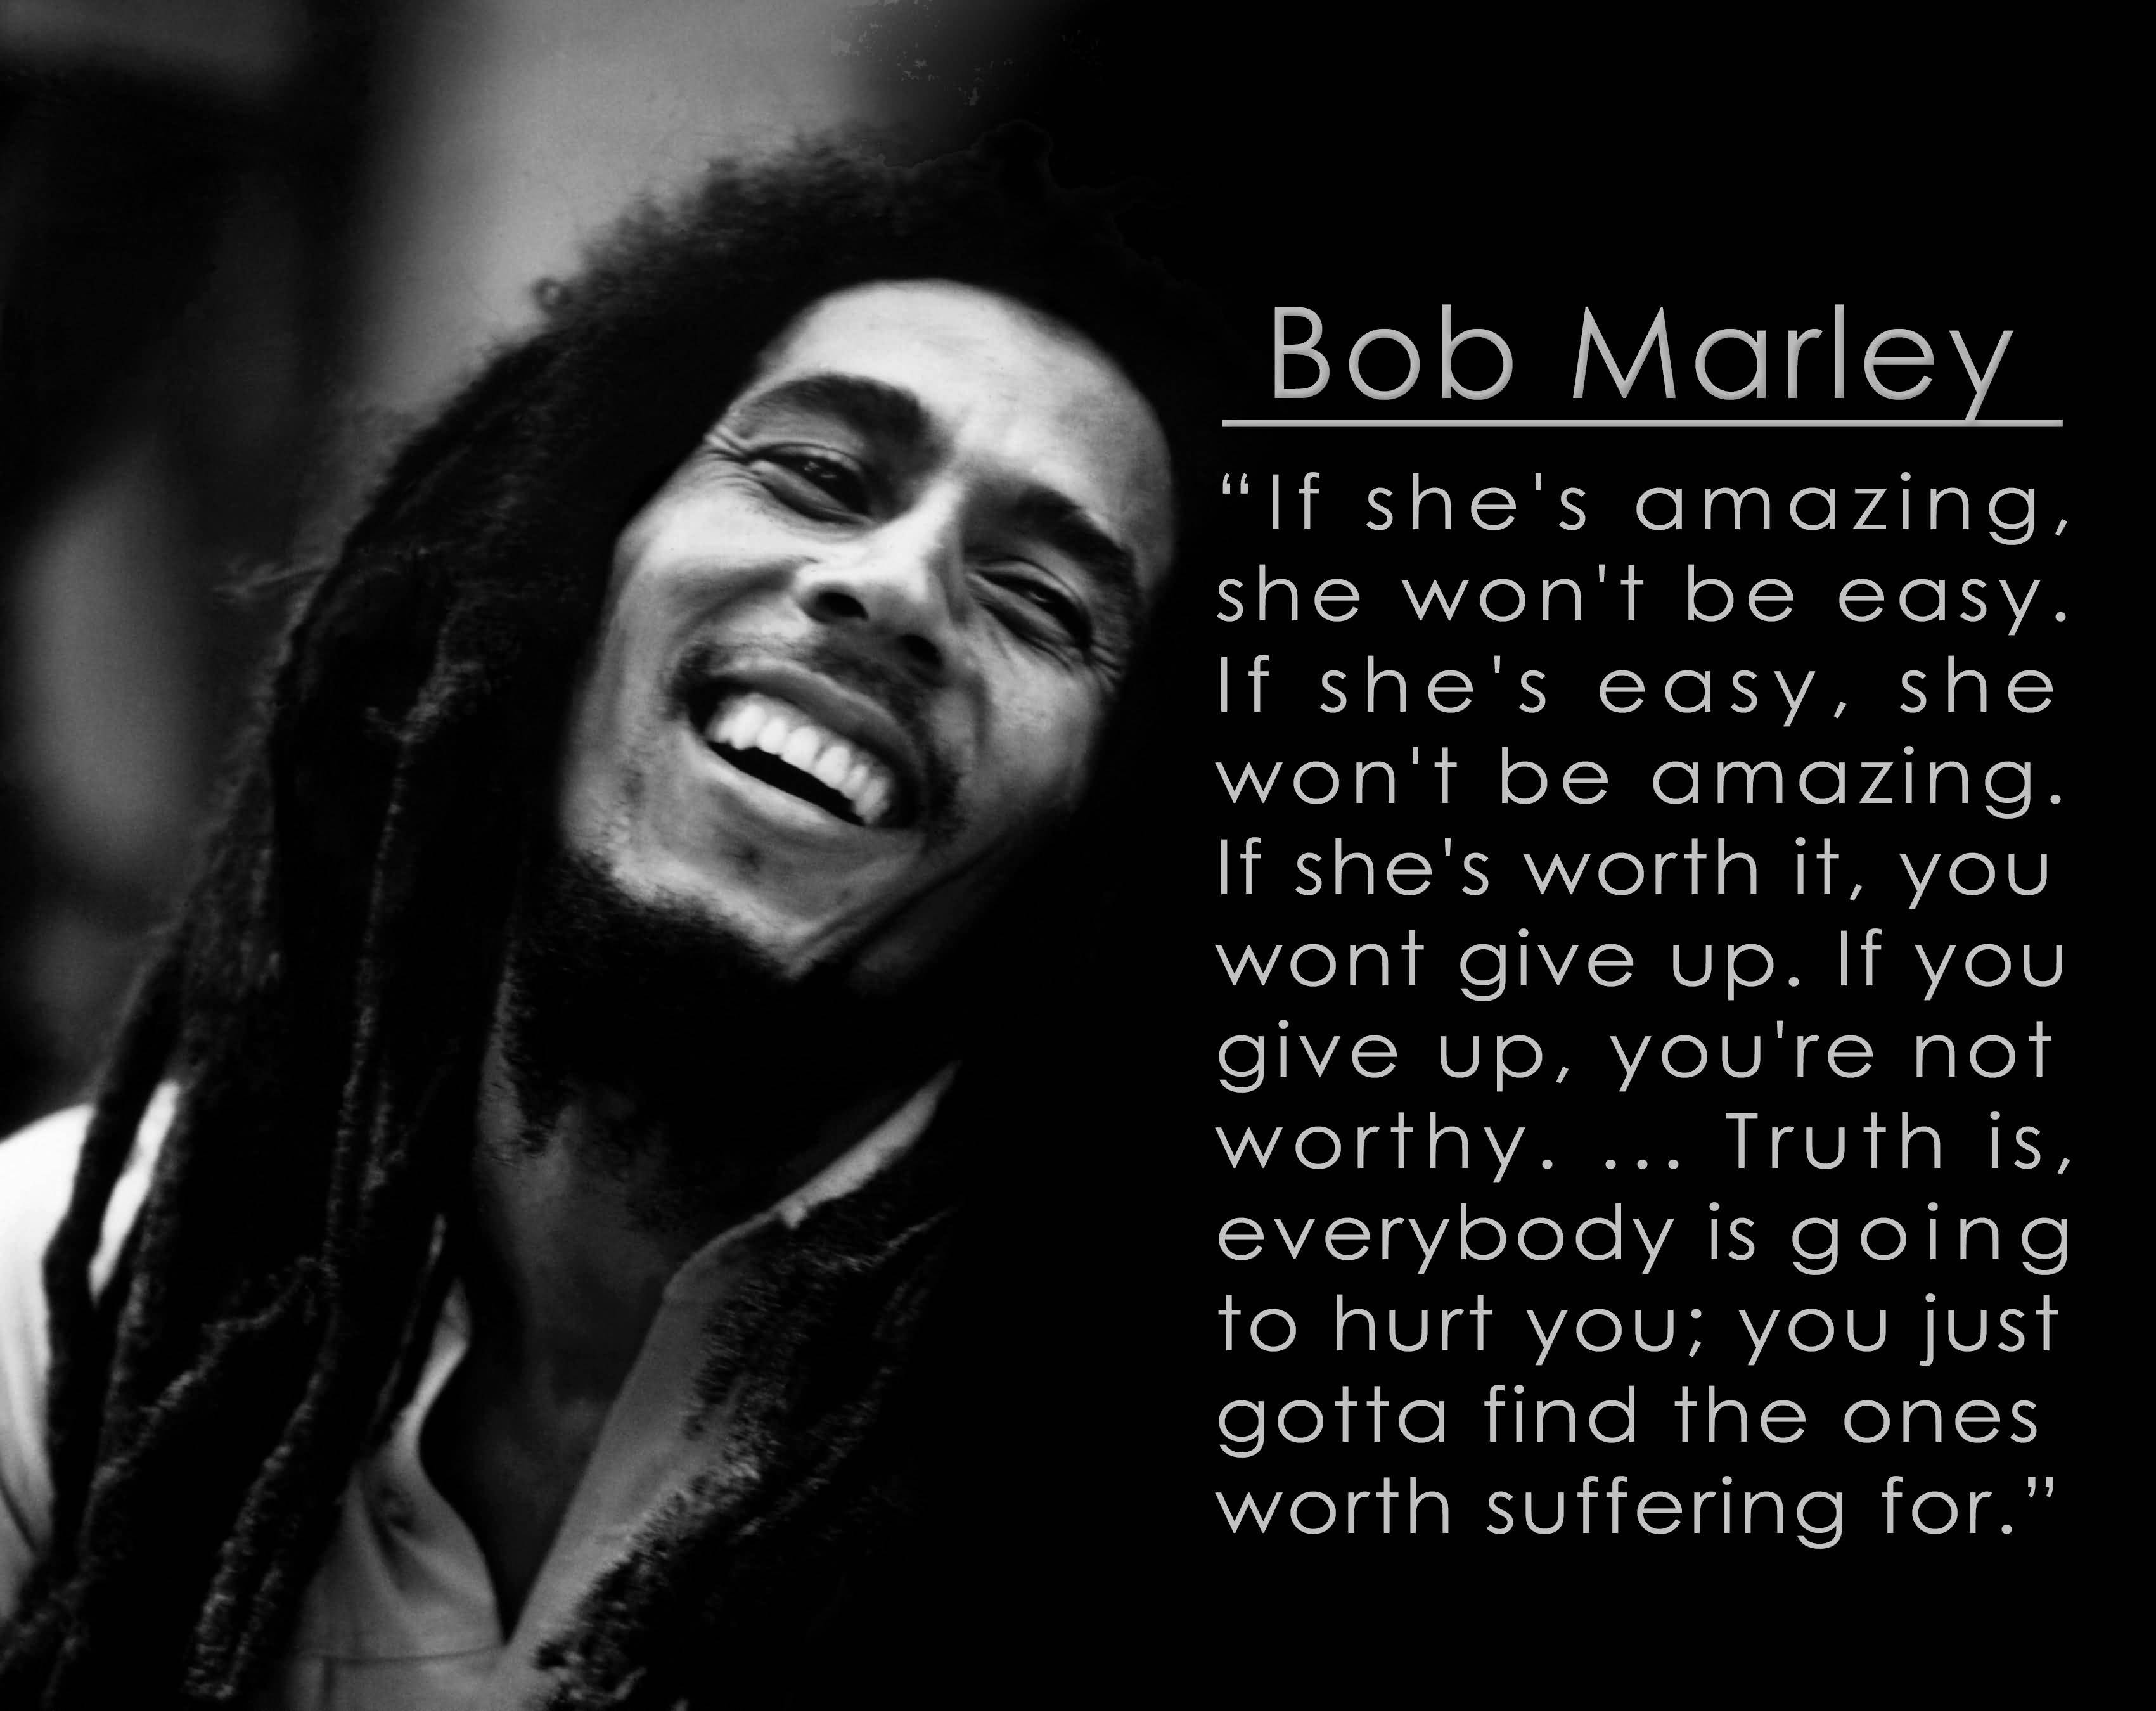 Bob Marley Quotes About Friendship 16